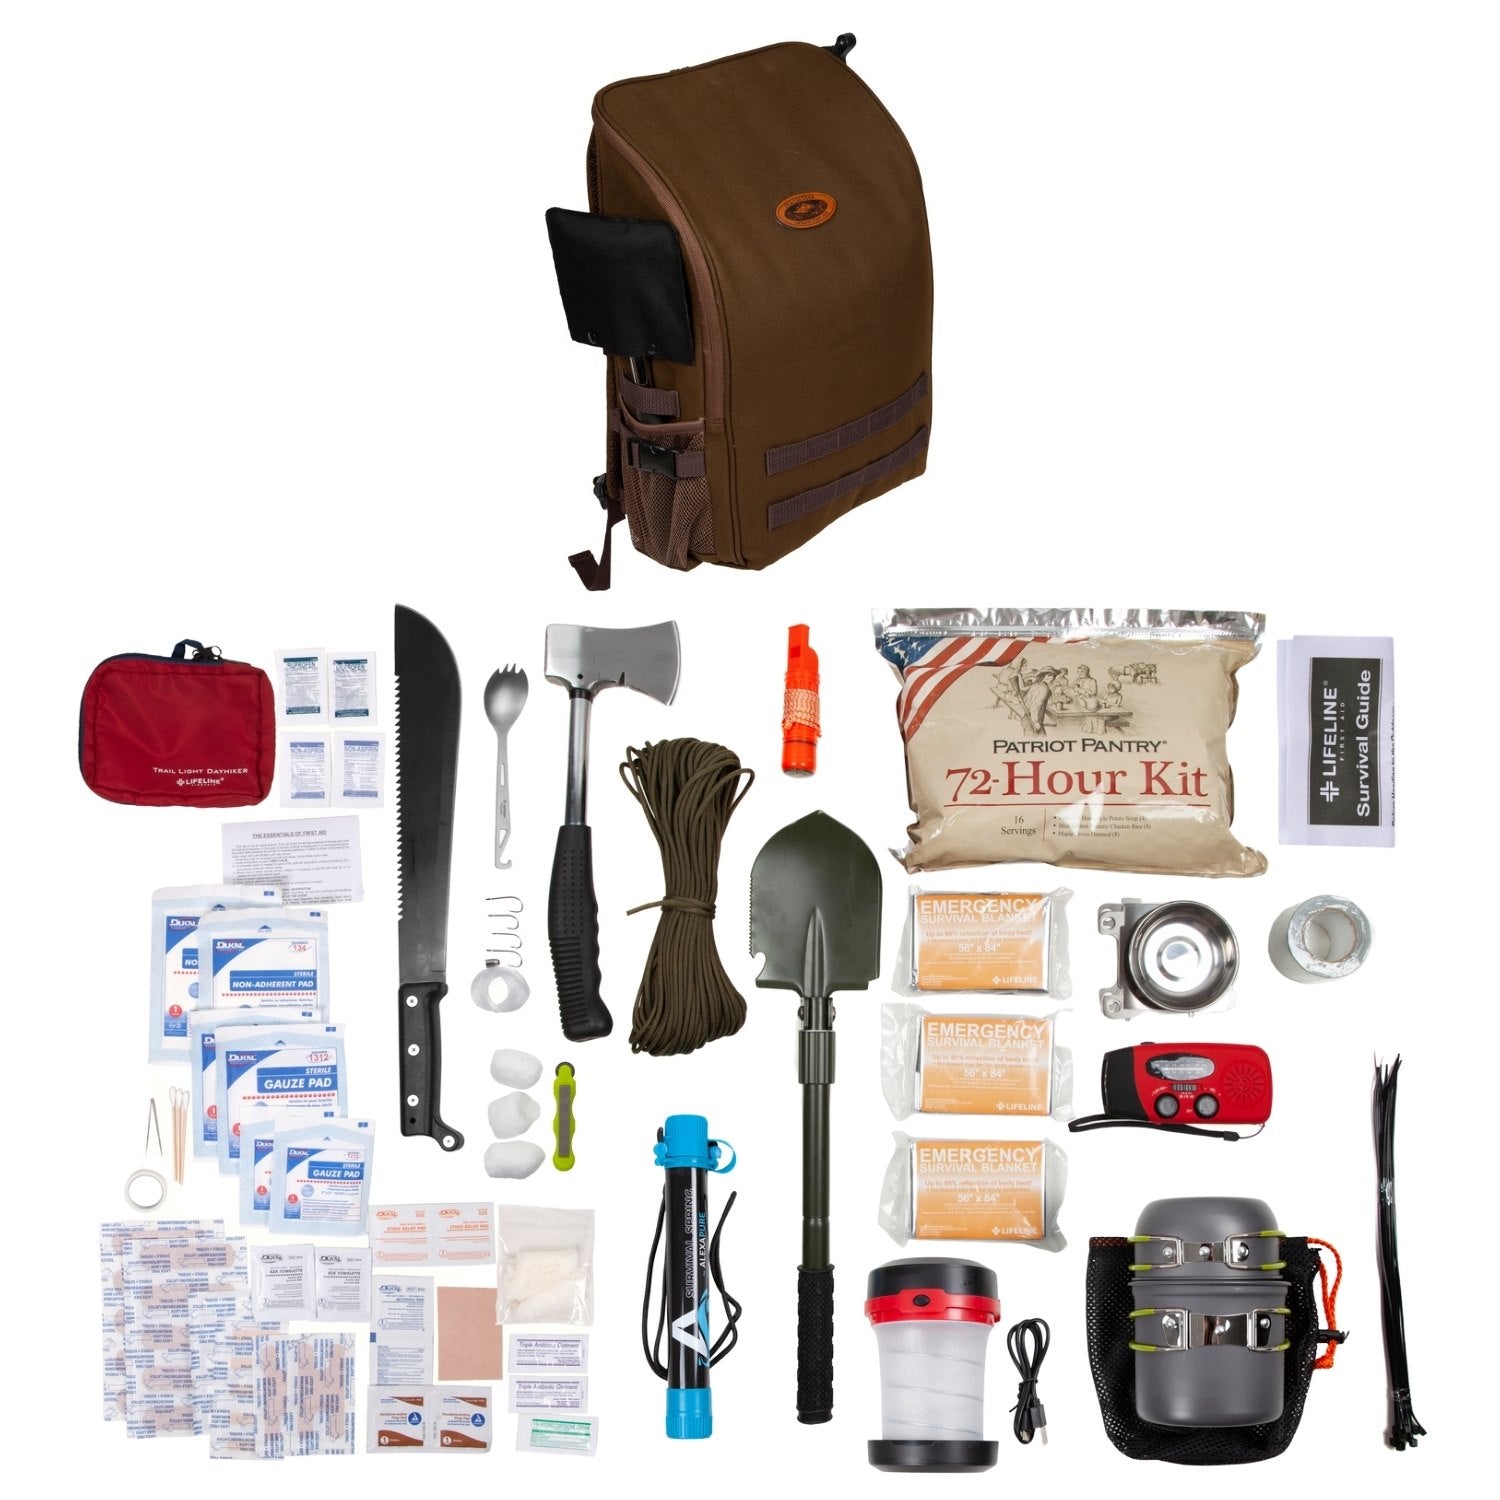 13 Must-Have Survival Items for Emergency Prepping